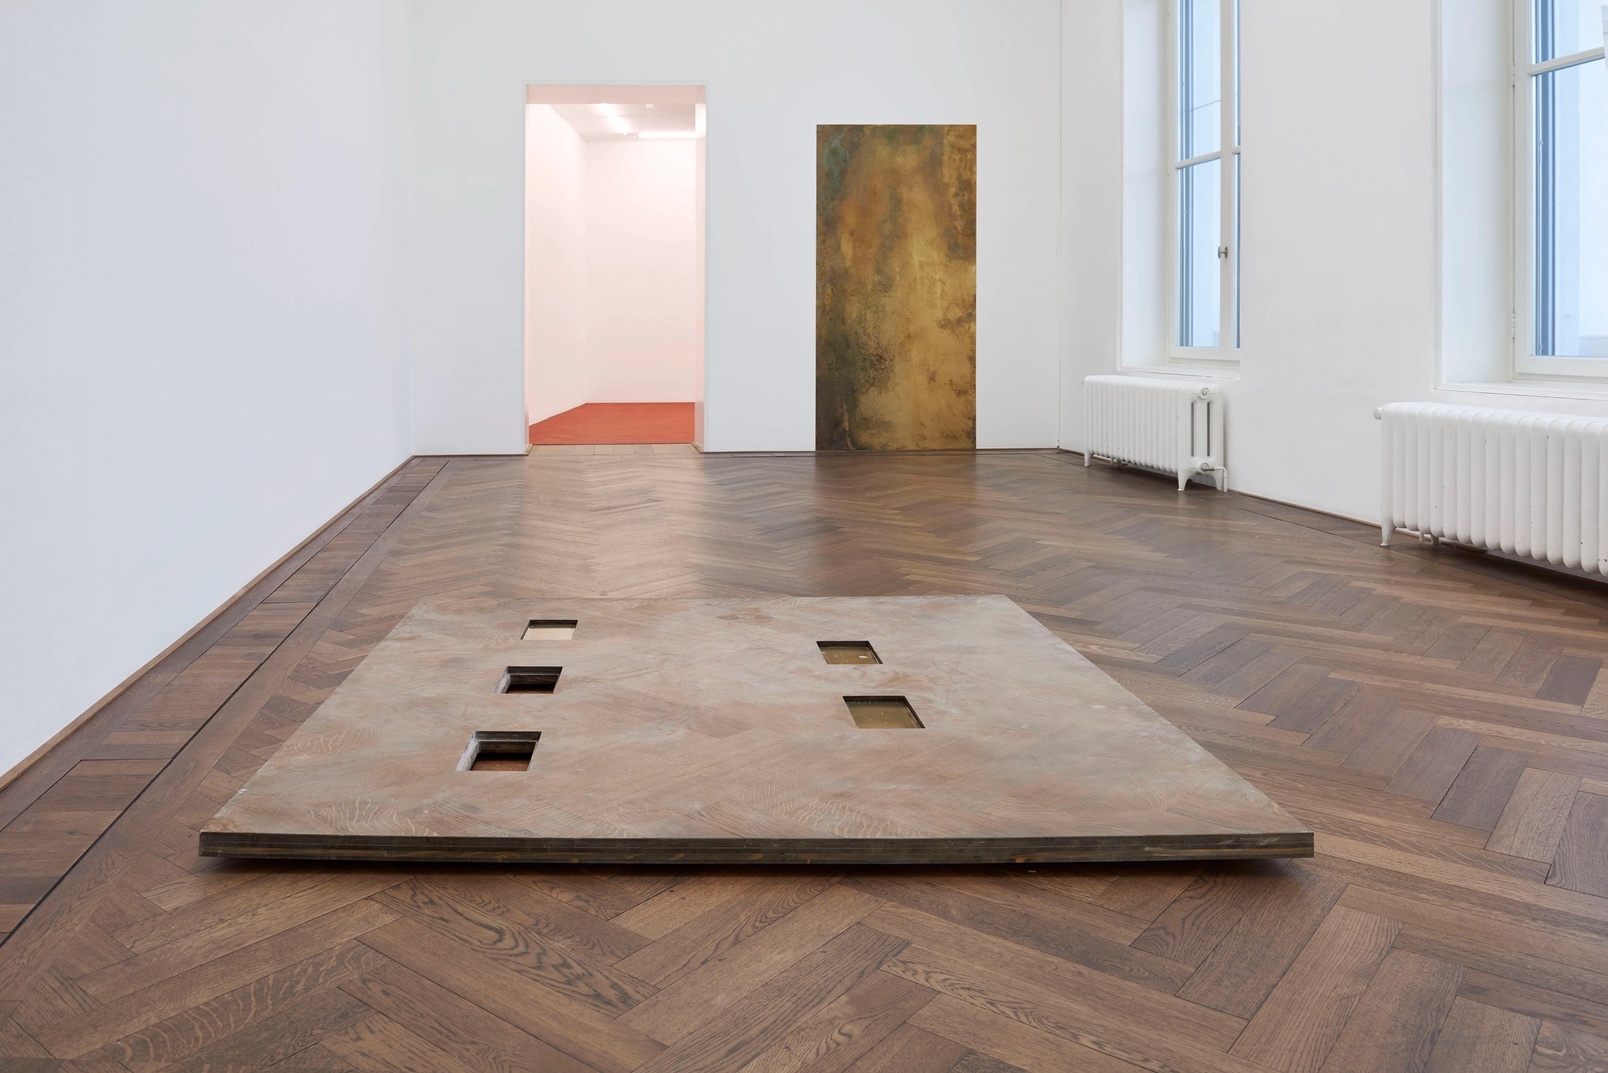 Slide 6/14: Dora Budor, I am Gong: The Devil, Probably, 2019 [front] and Solo for 1939, 2019 [back]. Installation view. Photo by Philipp Hänger / Kunsthalle Basel.

